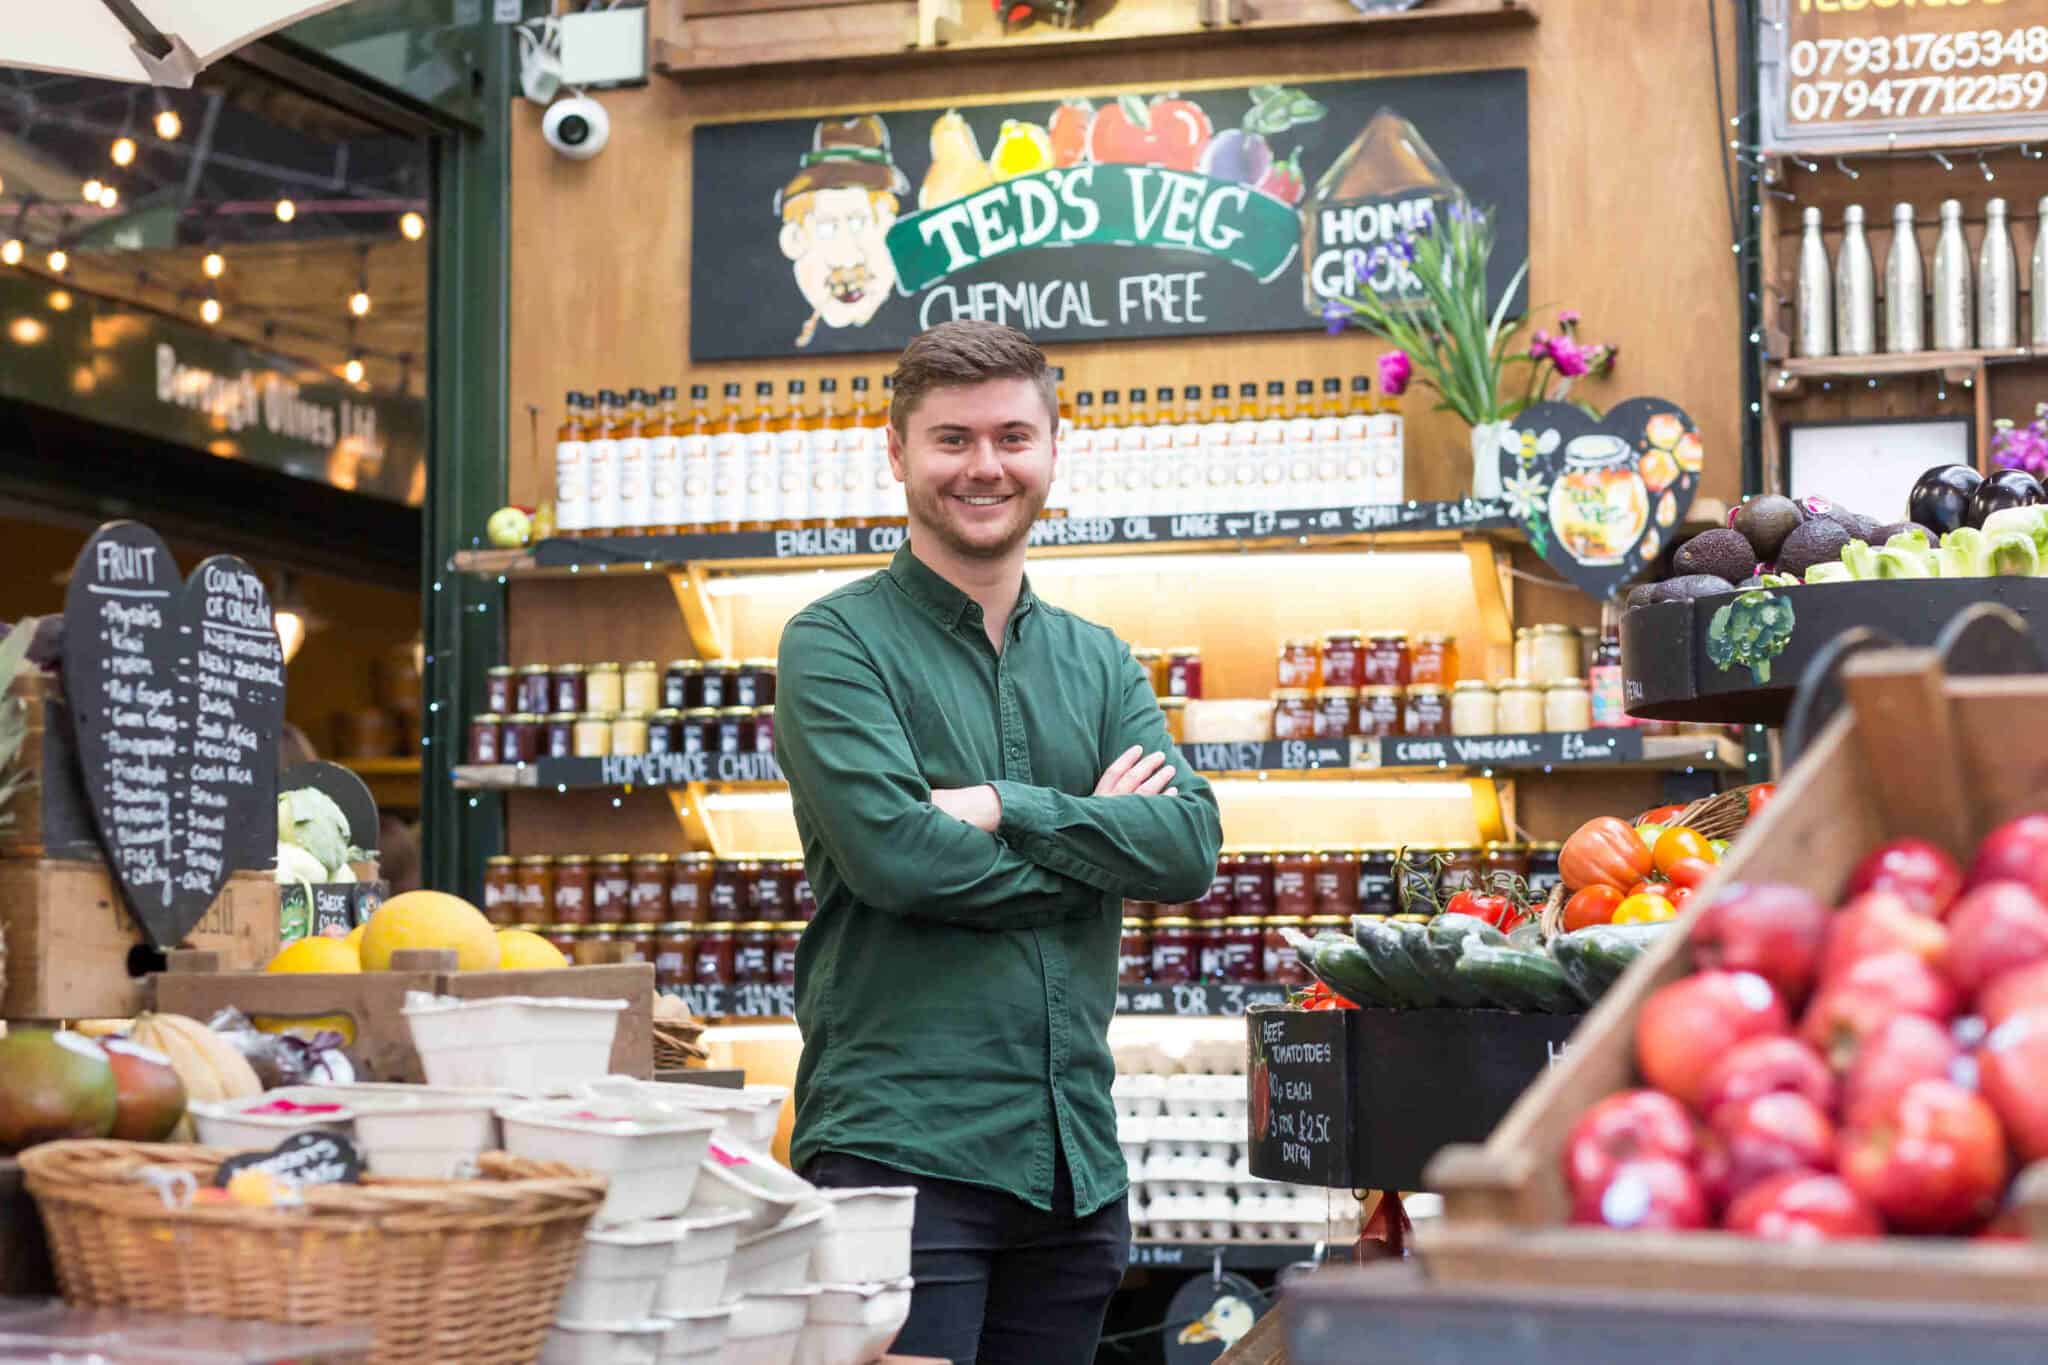 Sam is standing with his arms crossed in front of an array of fruit and vegetables. Behind him are 3 shelves laden with condiments and oils. He's wearing a green shirt and smiling.